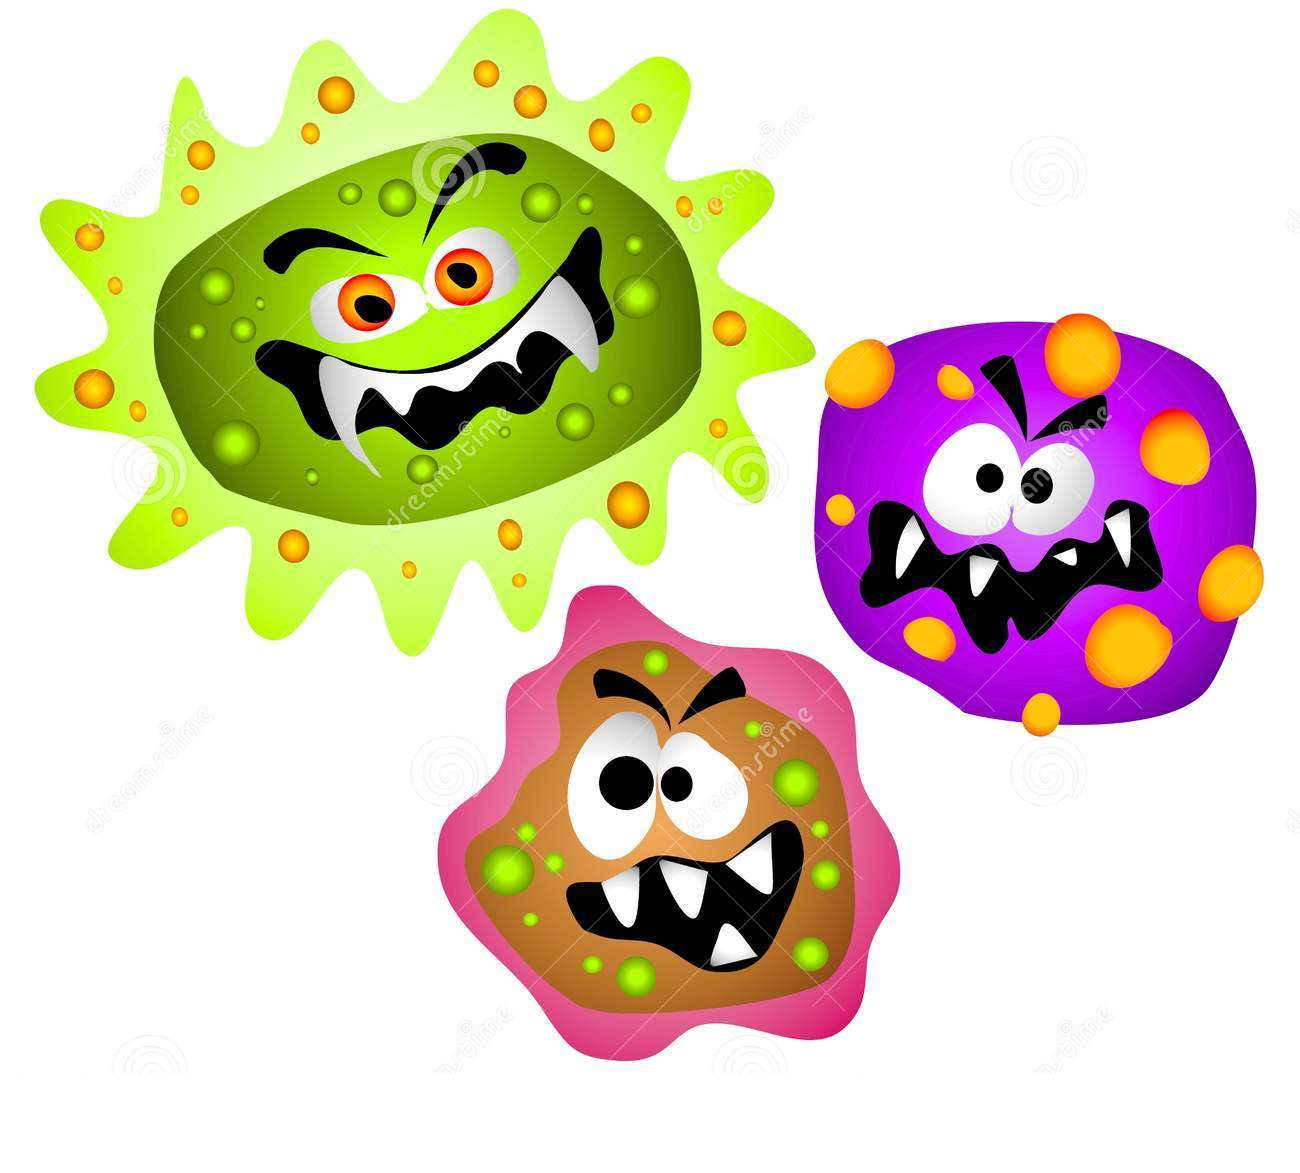 free clipart images germs - photo #4